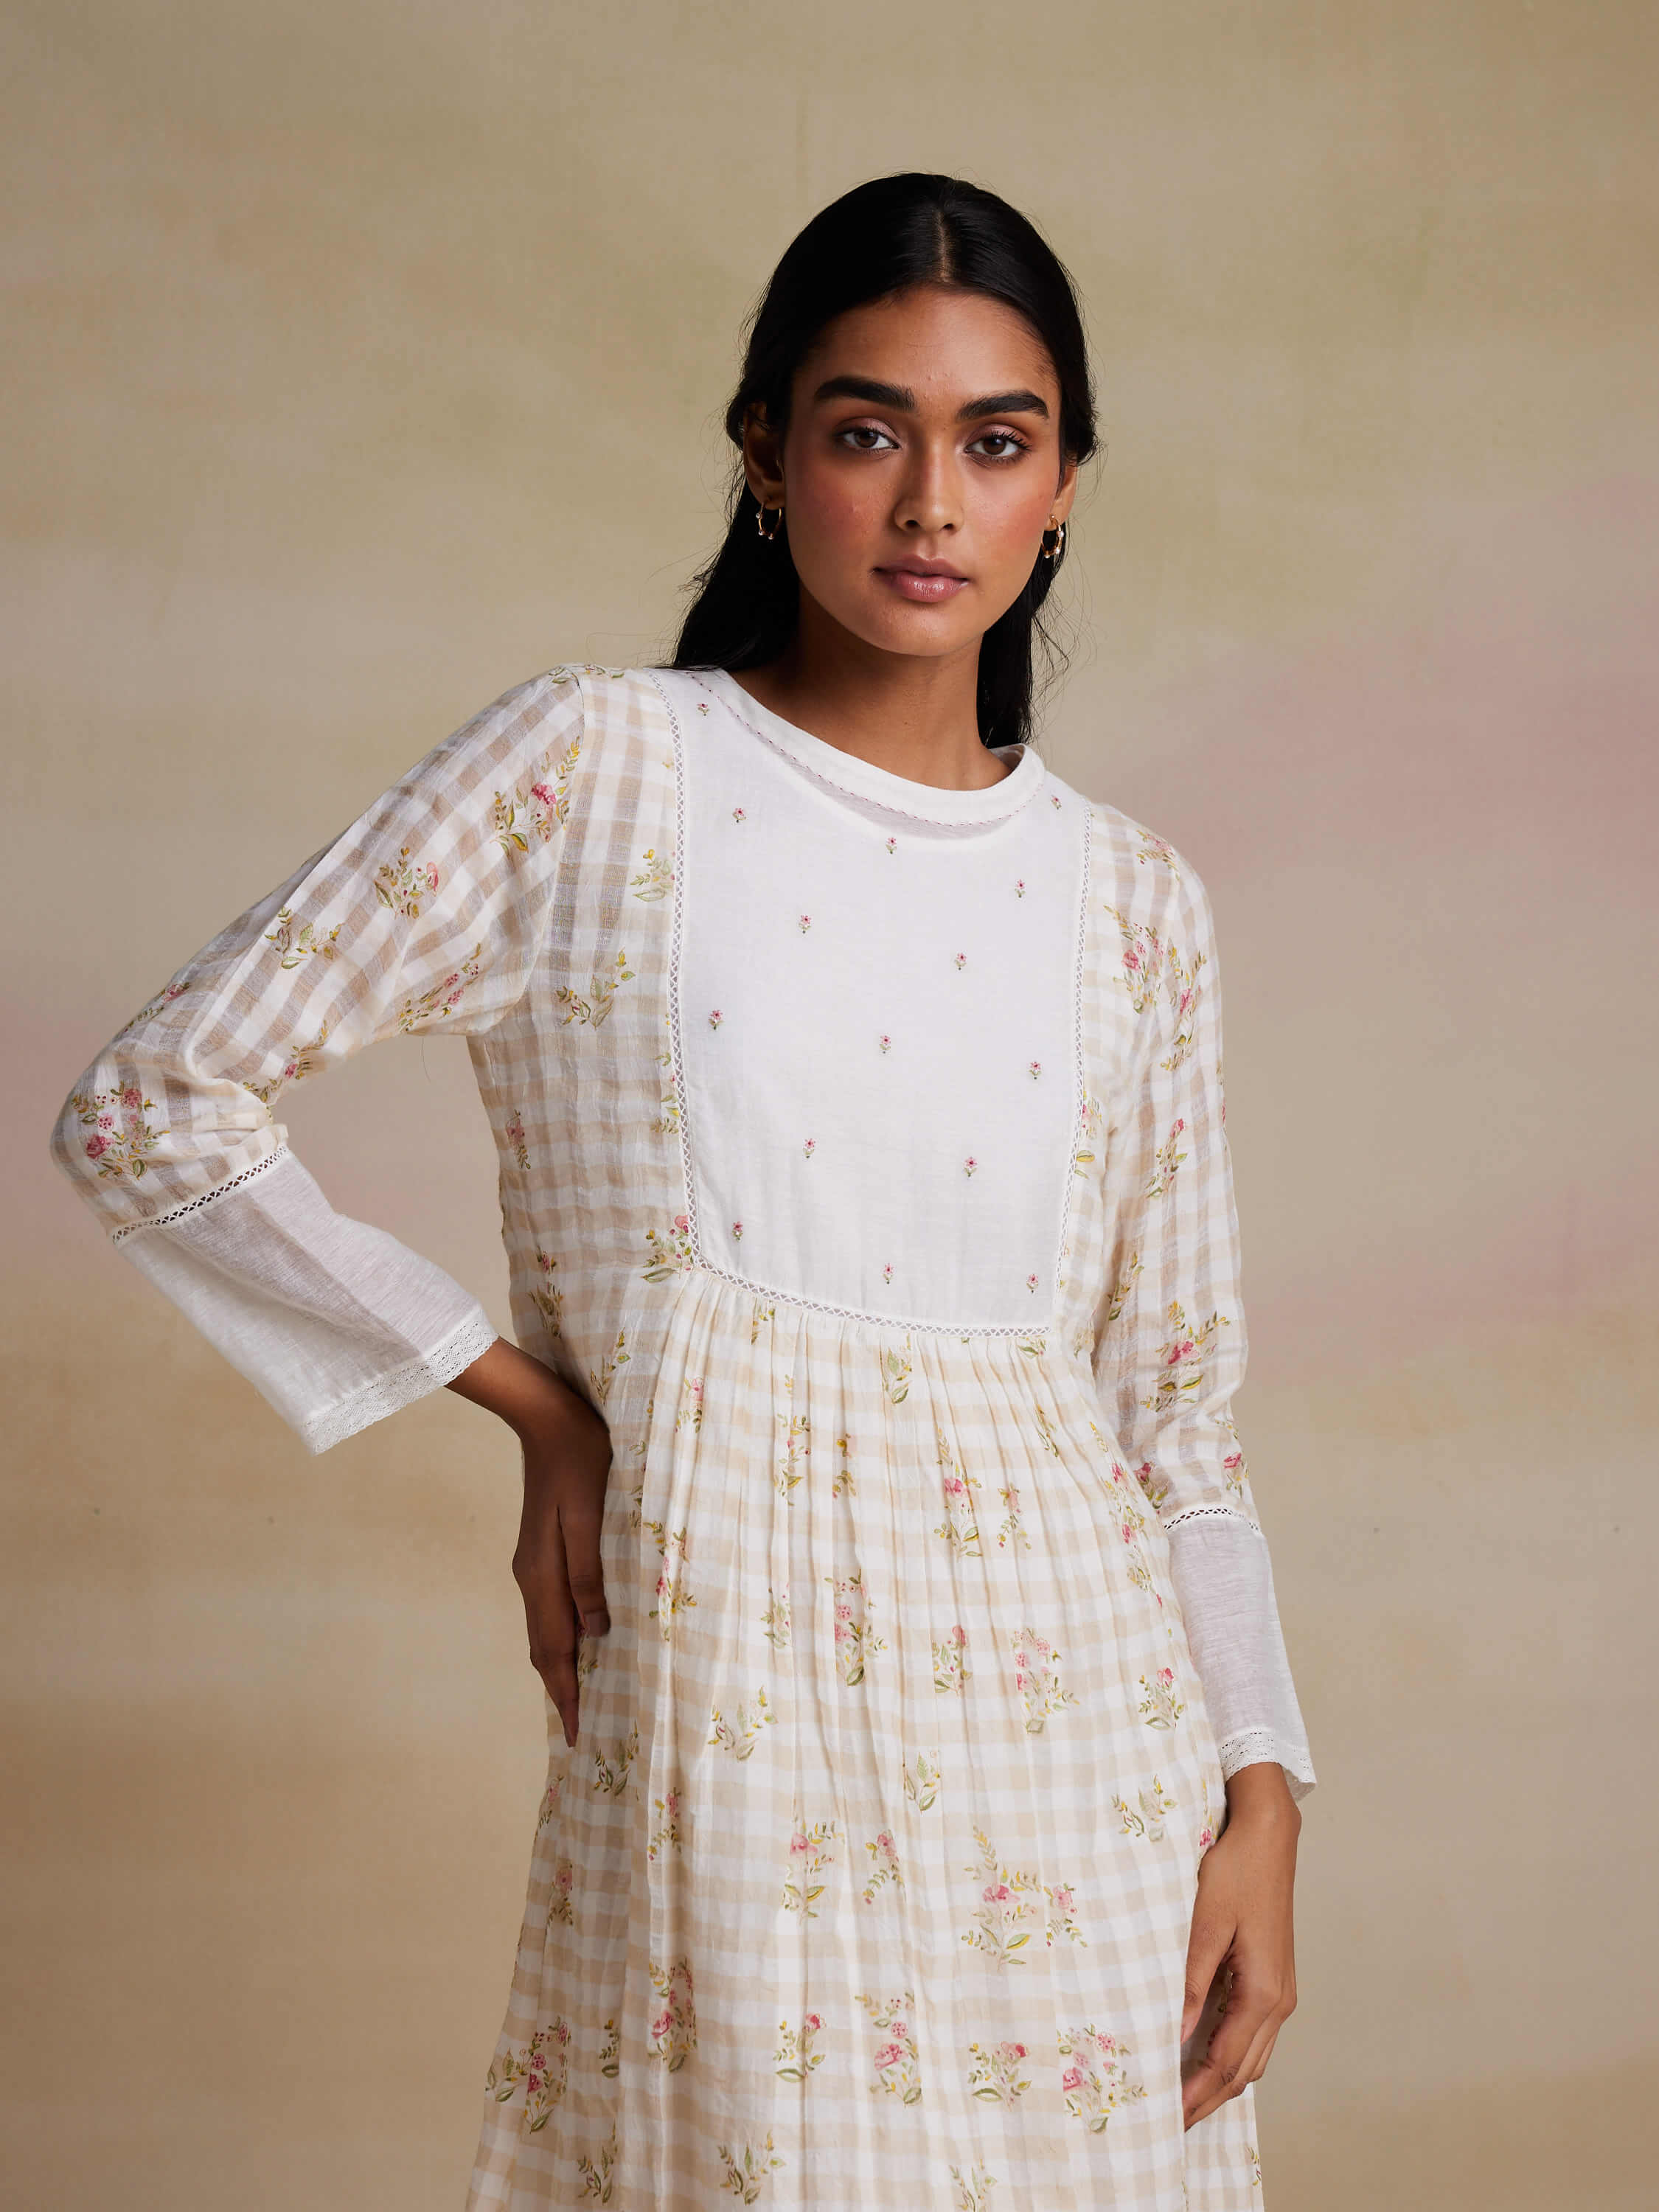 Woman modeling a white floral summer dress with checkered pattern.